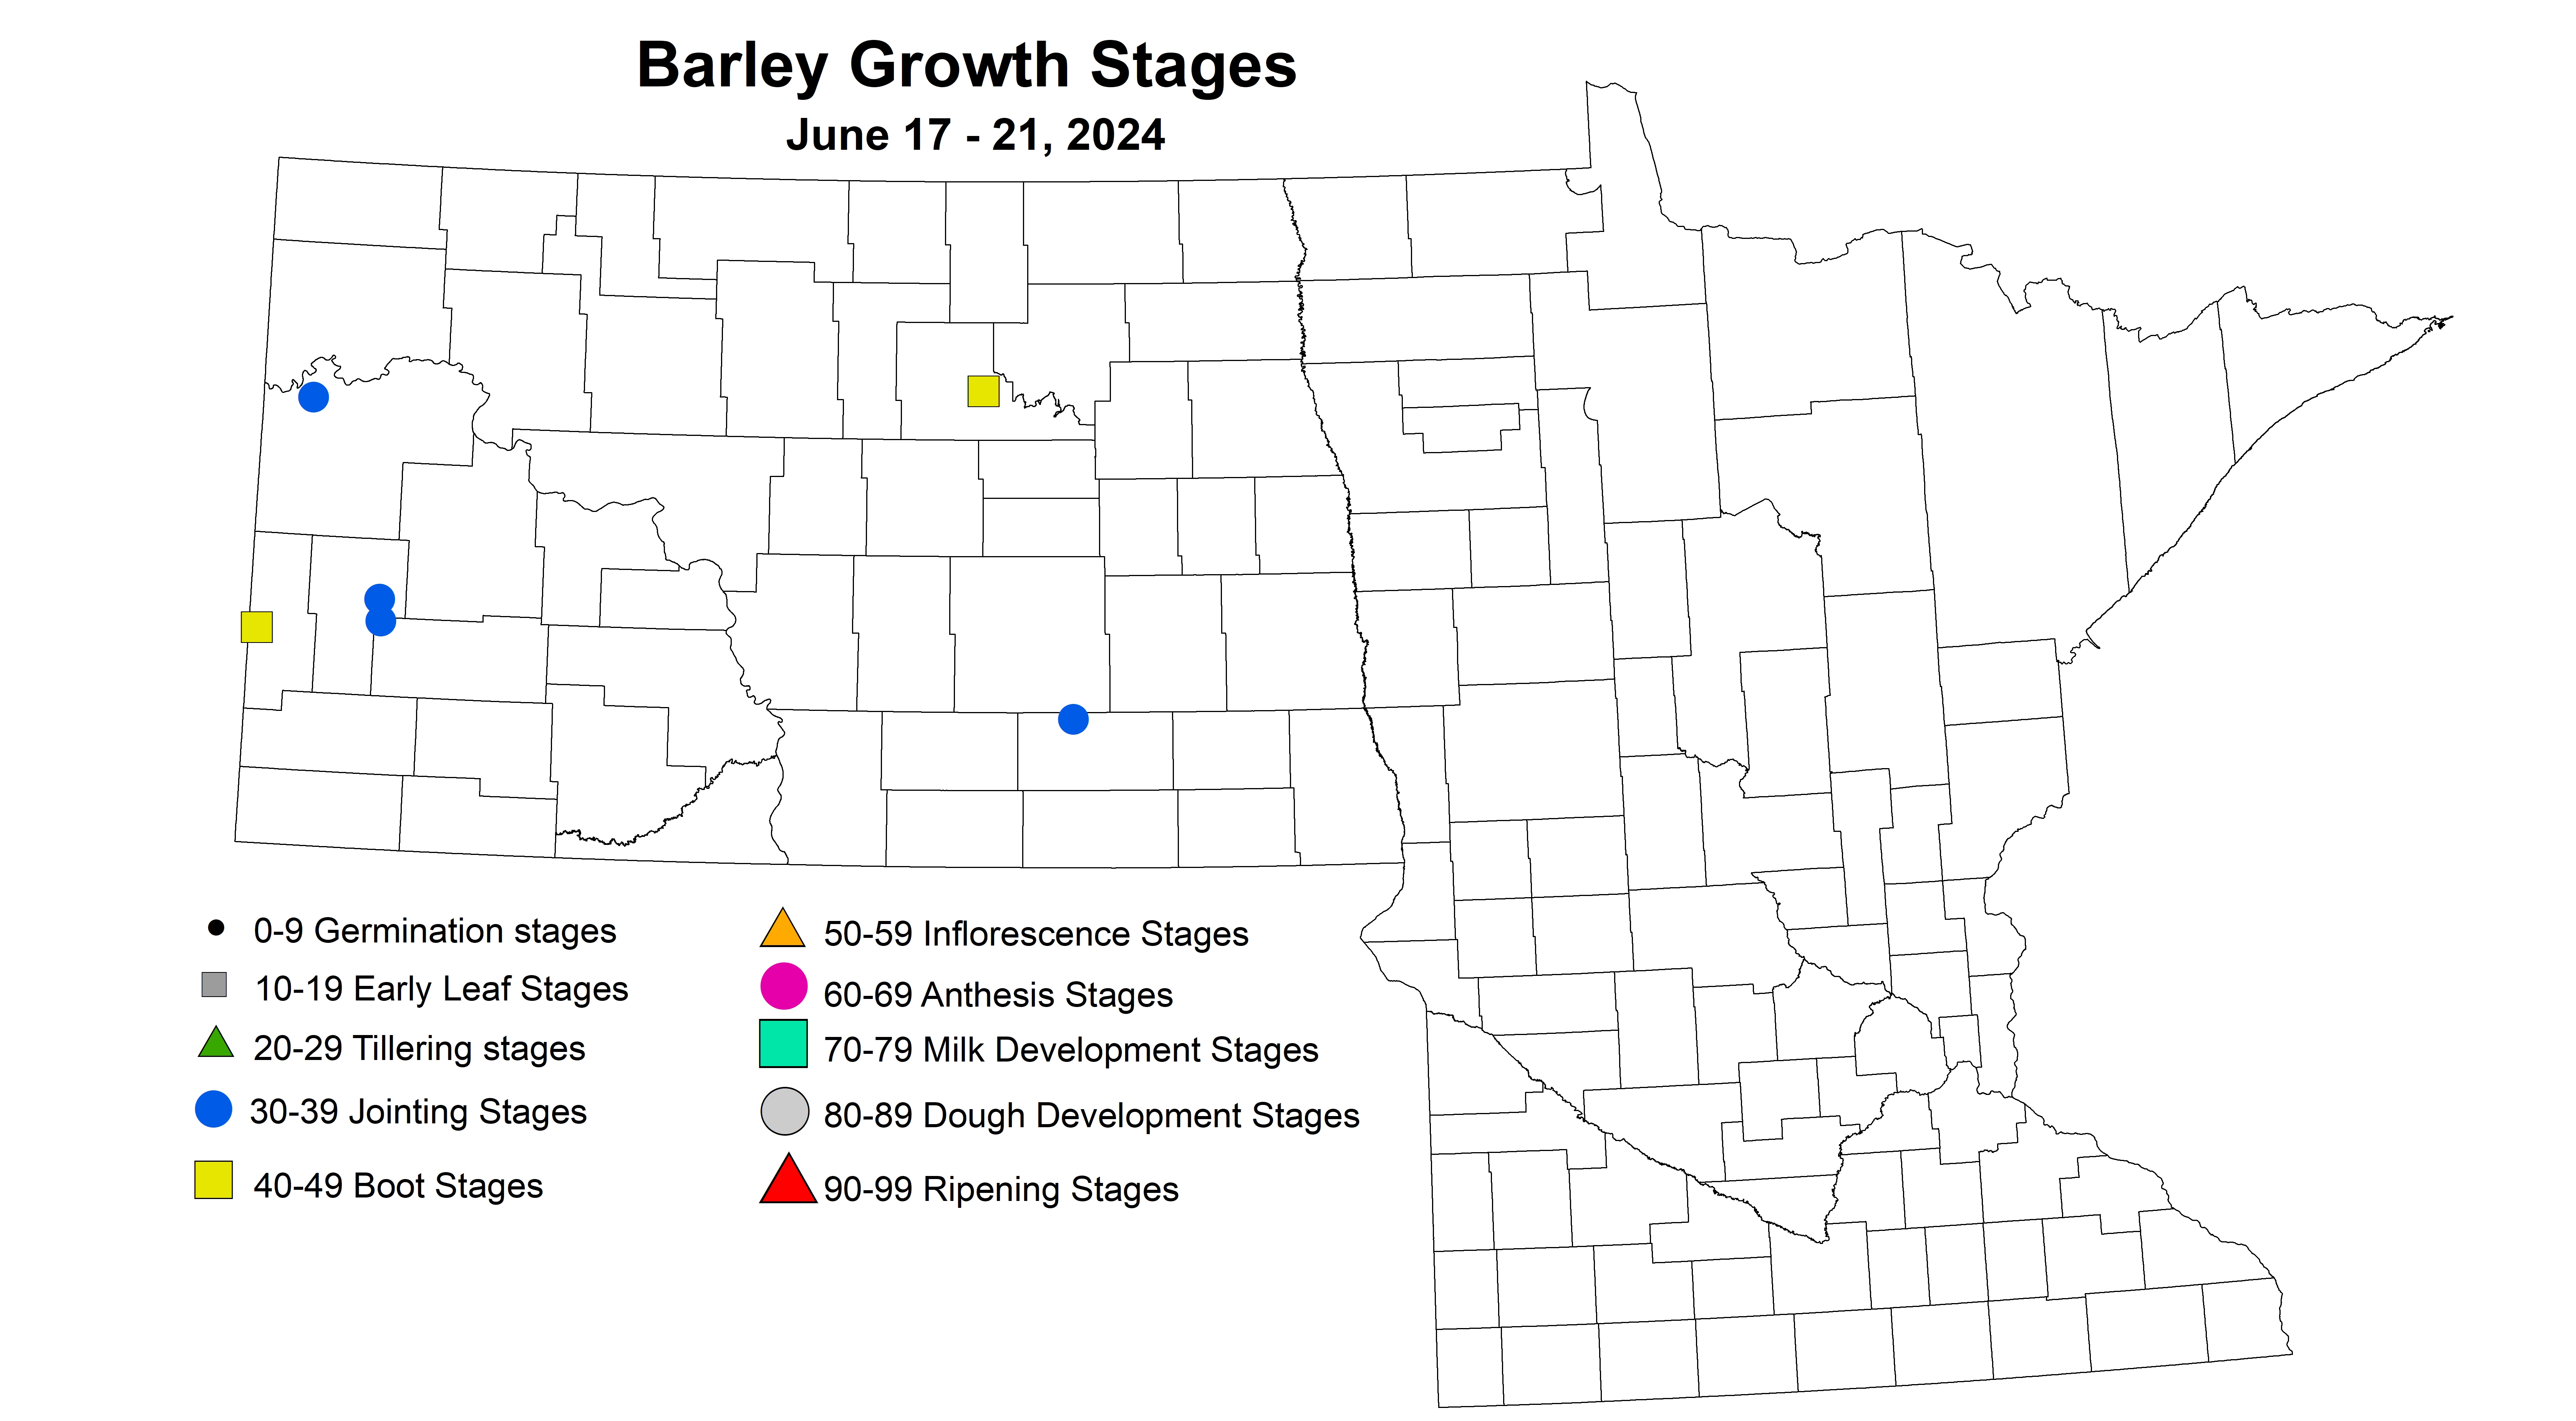 barley growth stages June 17-21 2024